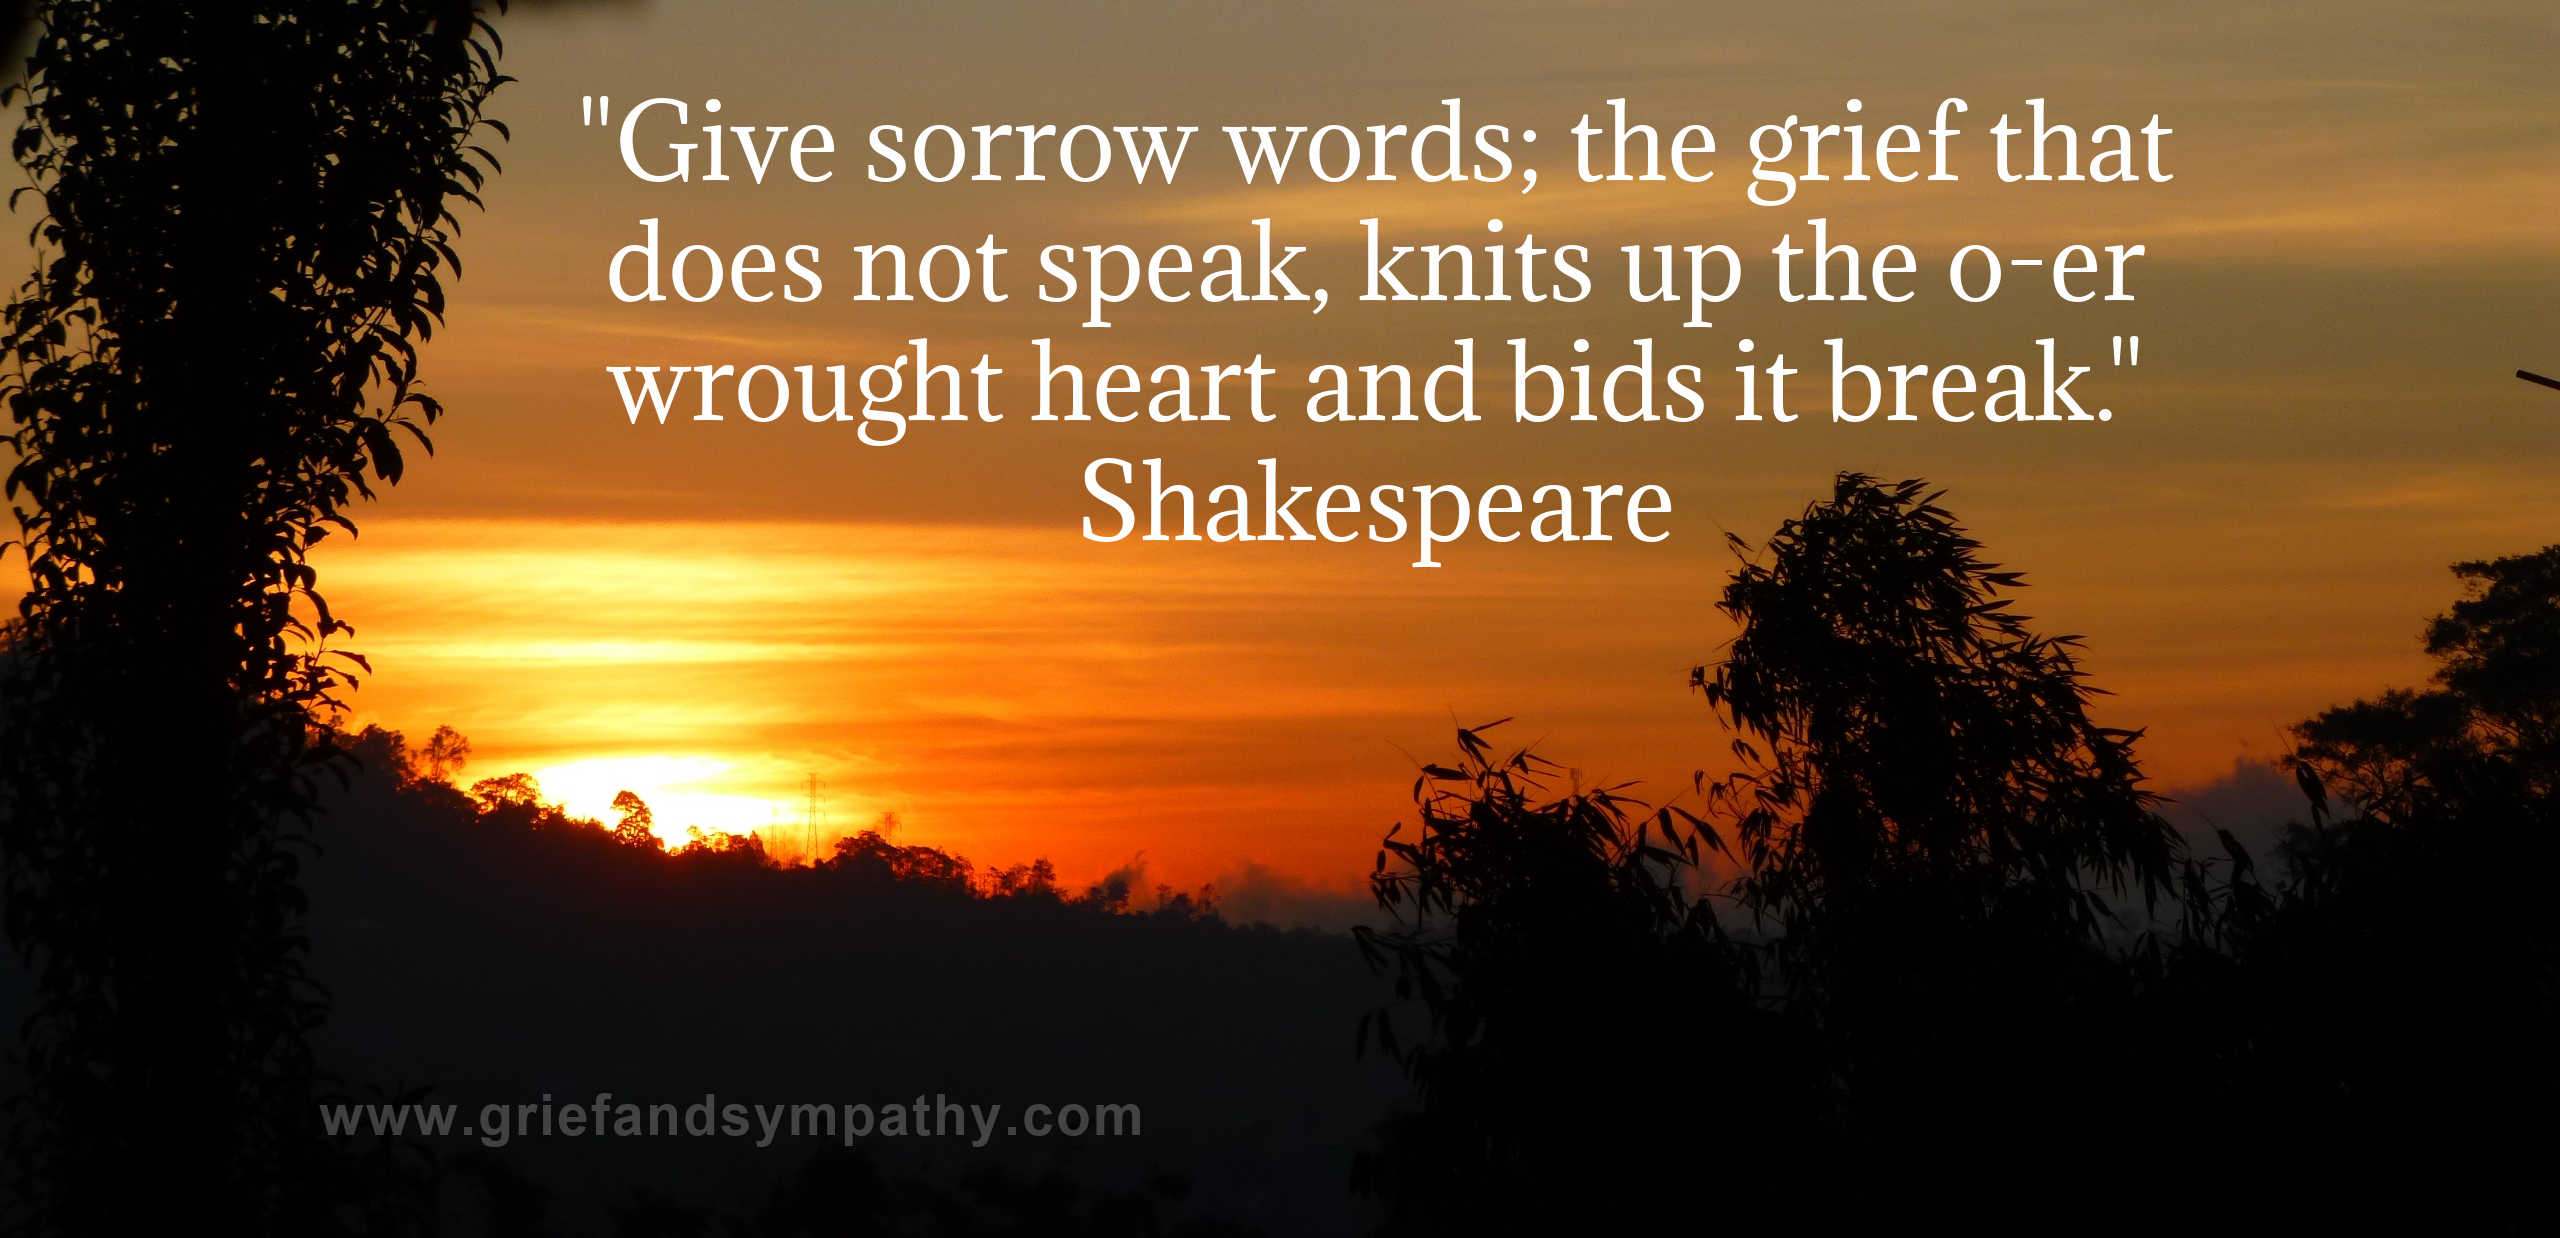 Shakespeare quote "Give sorrow words . . . "